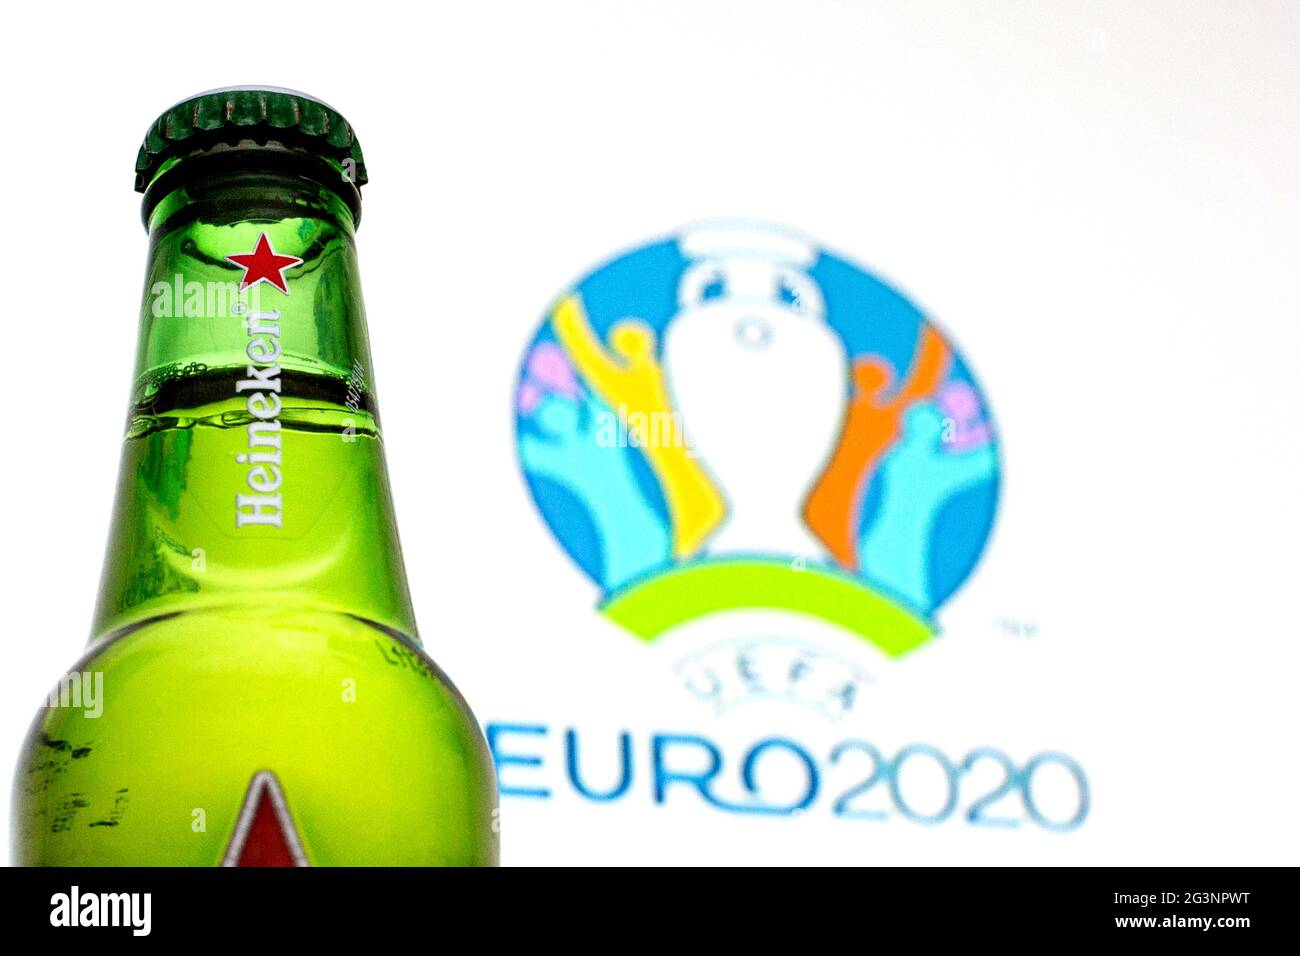 June 16, 2021, Spain: In this photo illustration a Heineken beer bottle seen displayed in front of a UEFA Euro 2020 logo in the background. (Credit Image: © Thiago Prudencio/SOPA Images via ZUMA Wire) Stock Photo